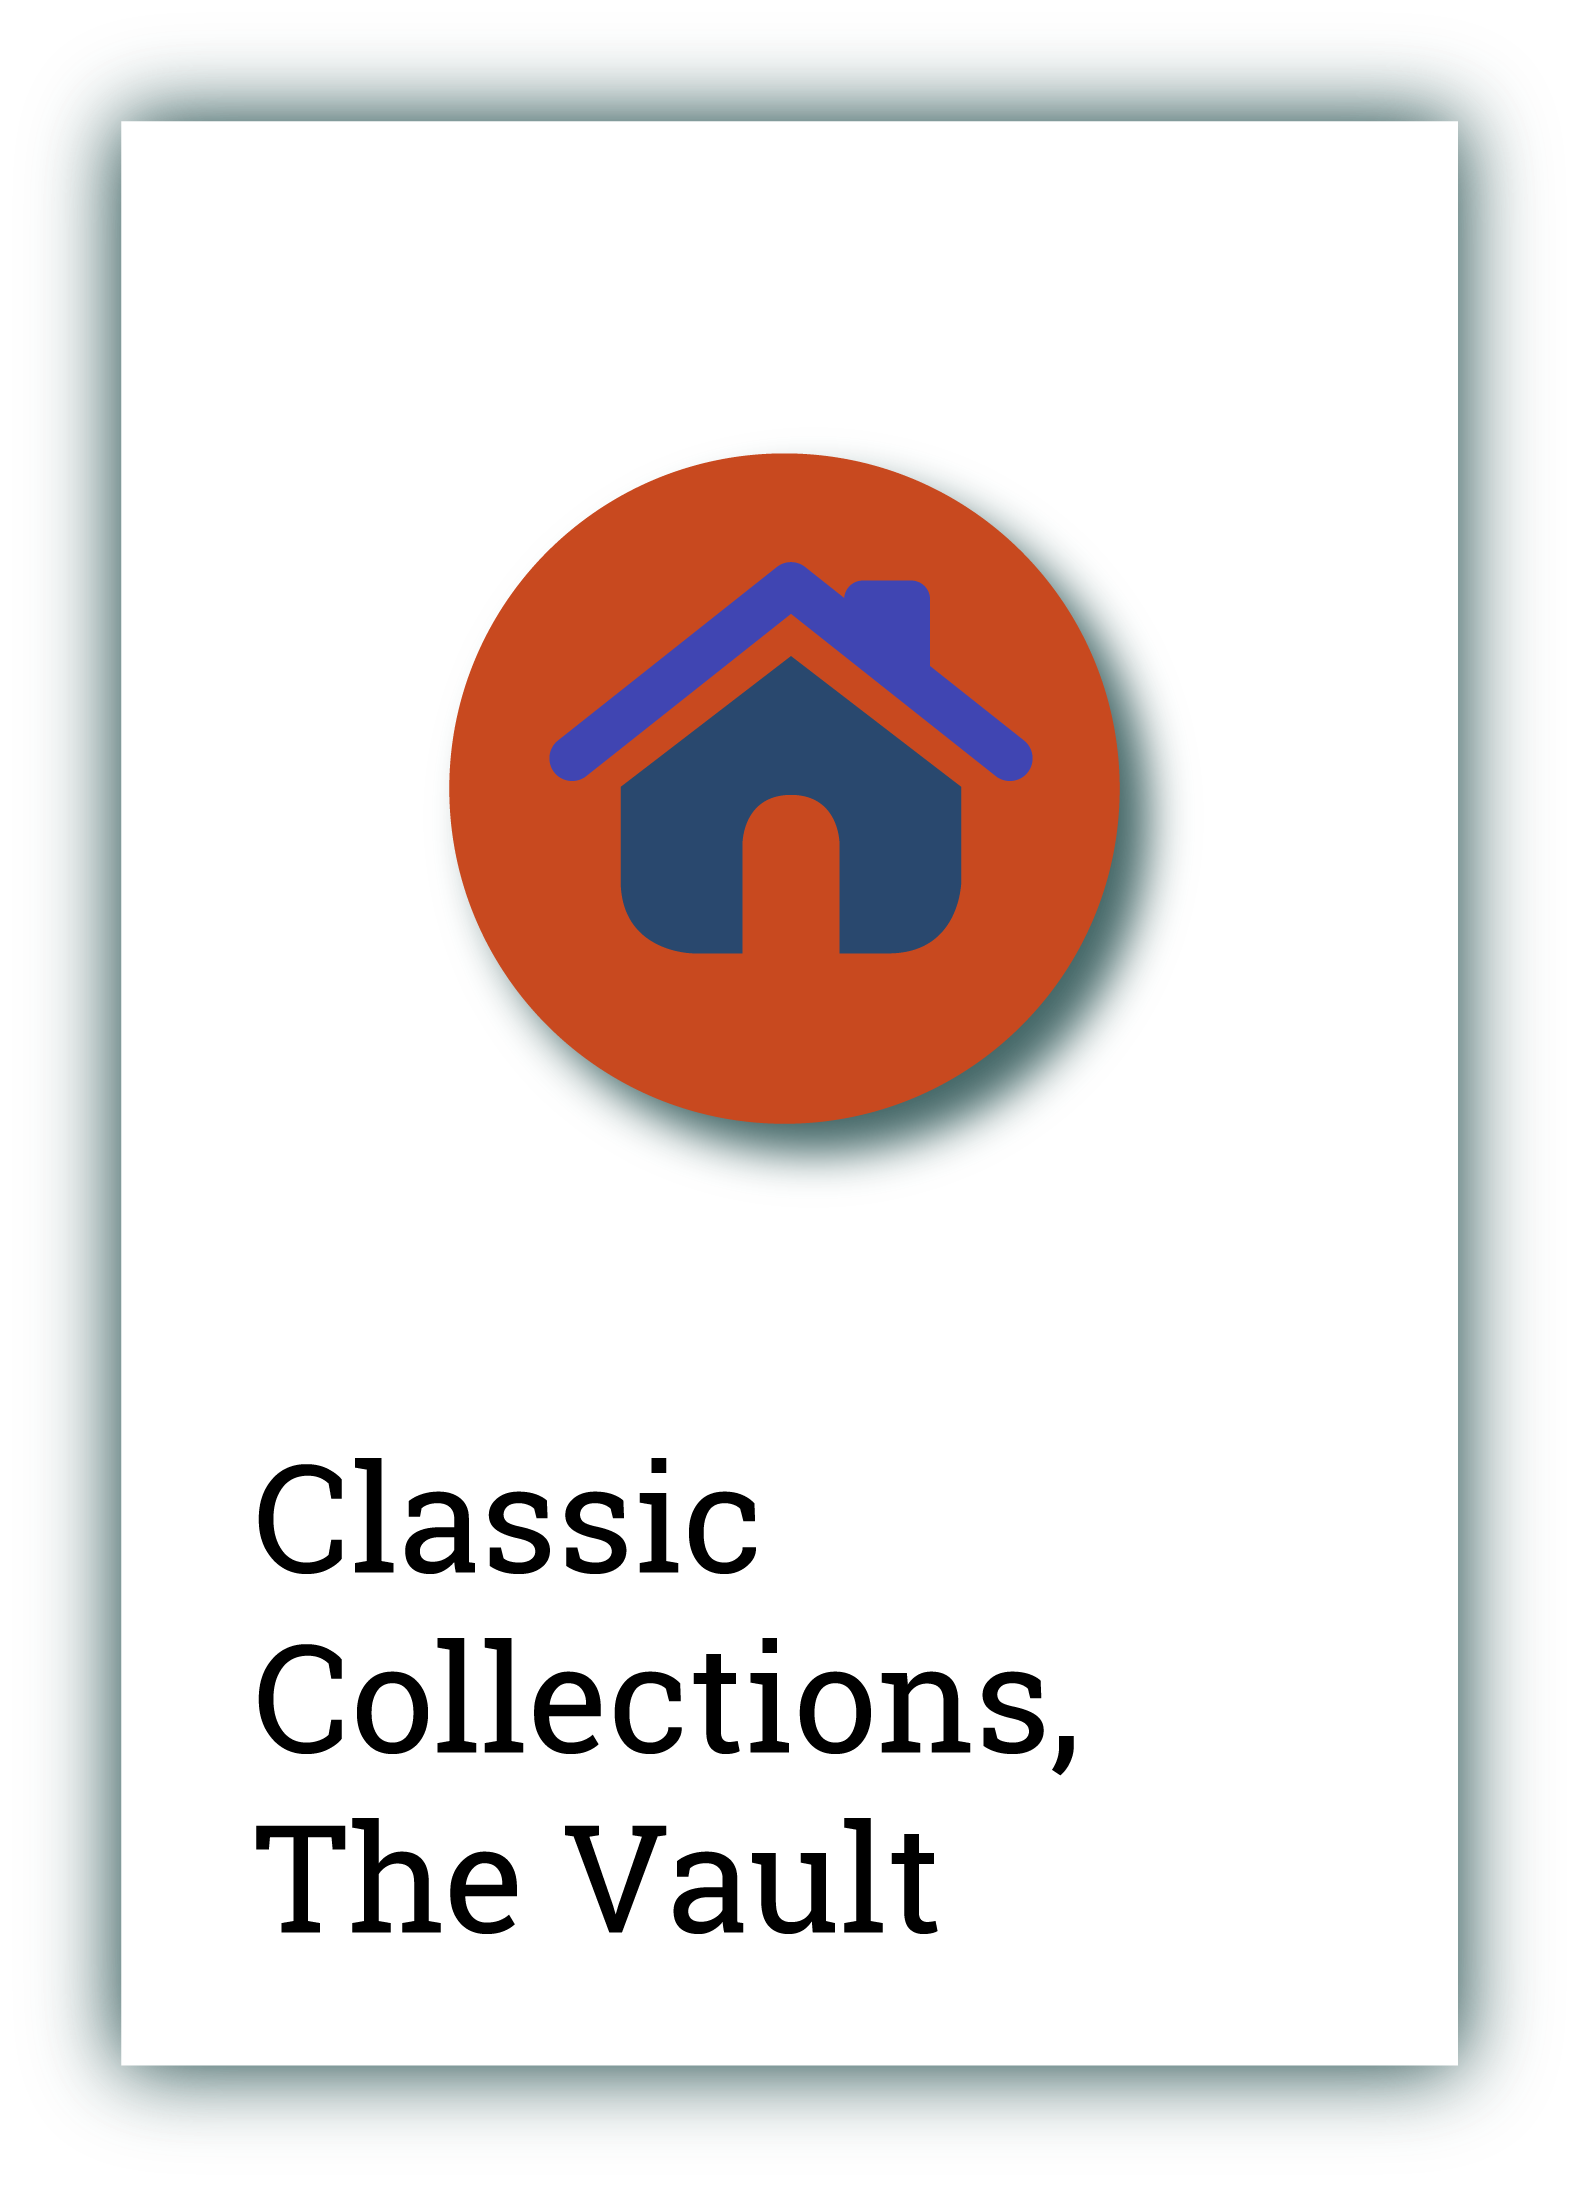 Classic Collections, The Vault